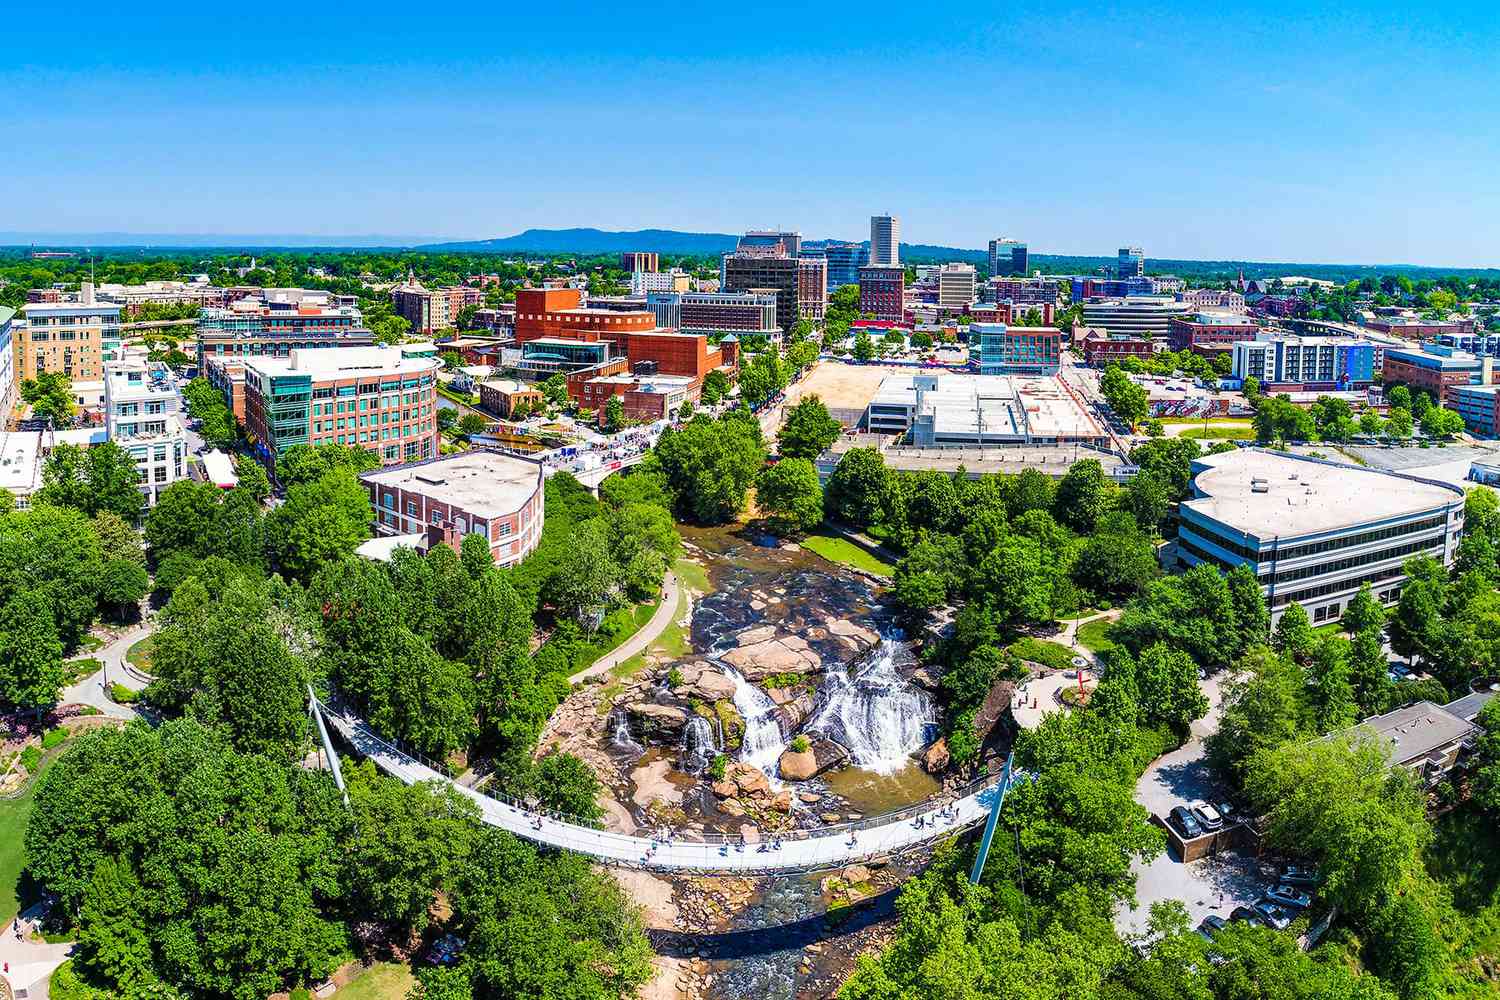 9 Facts About Local Legends And Folklore In Greenville, South Carolina ...